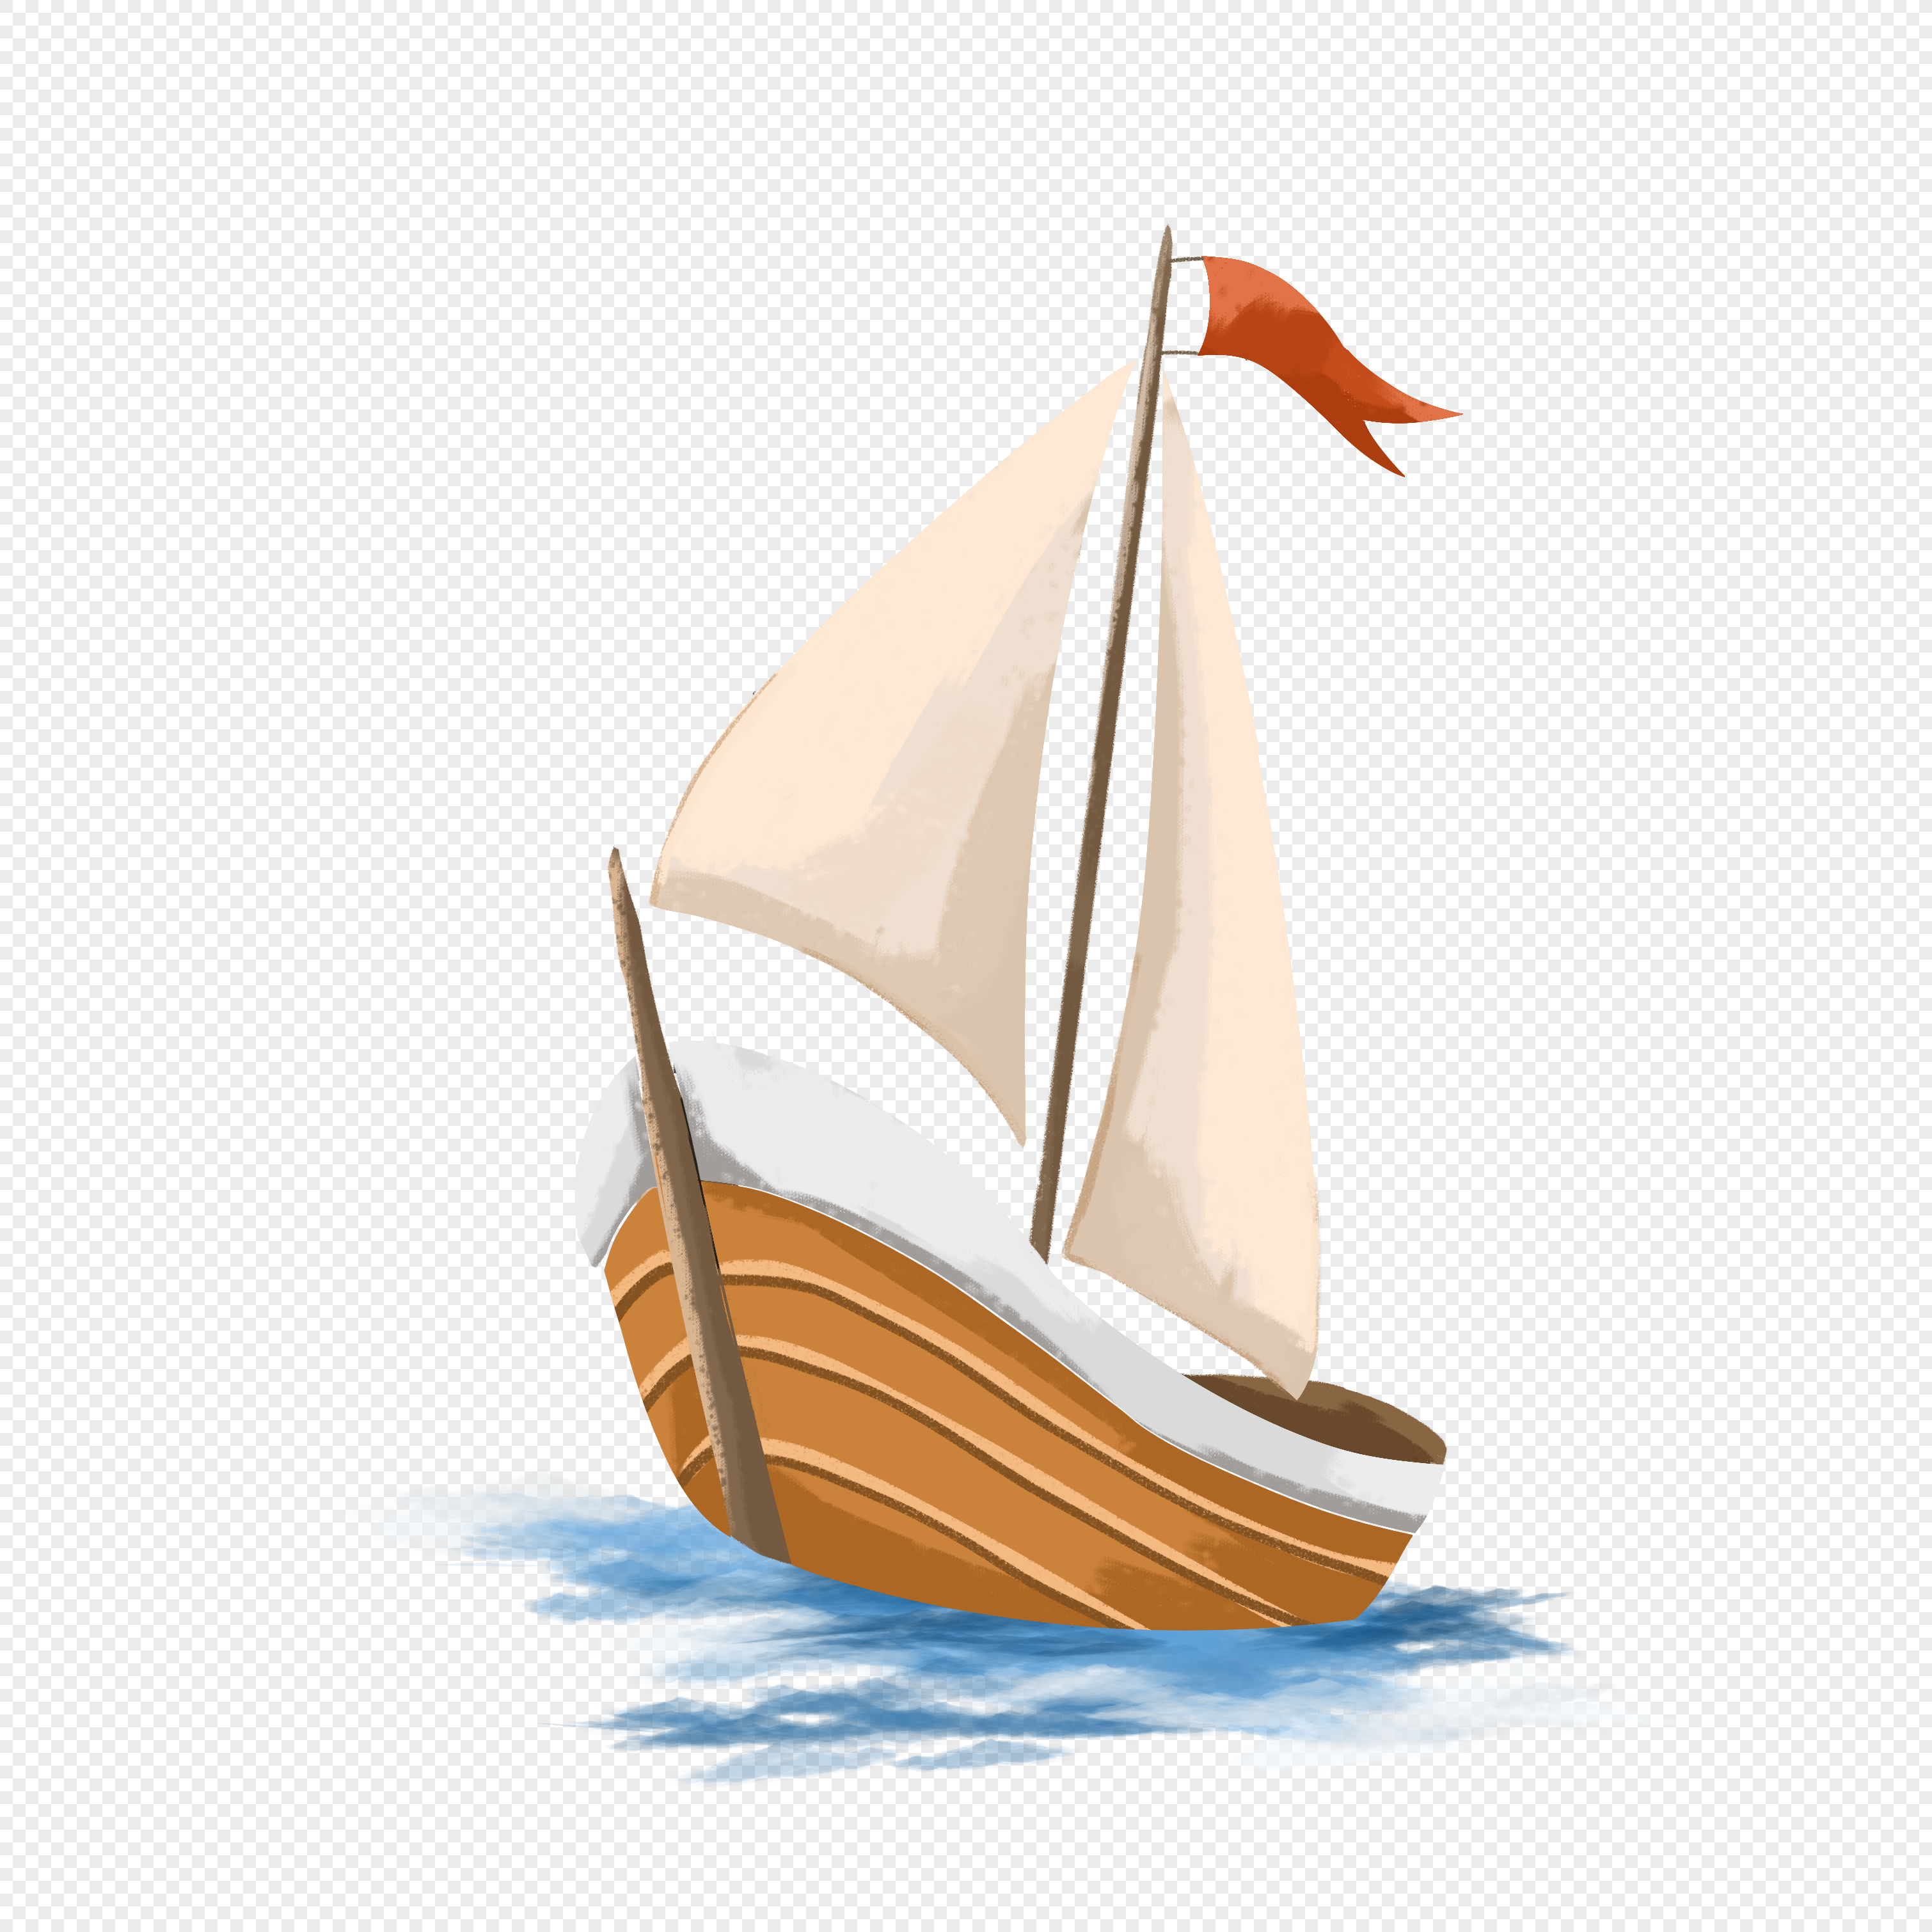 sailboat, sailboat background, protect the ocean, ocean png transparent background